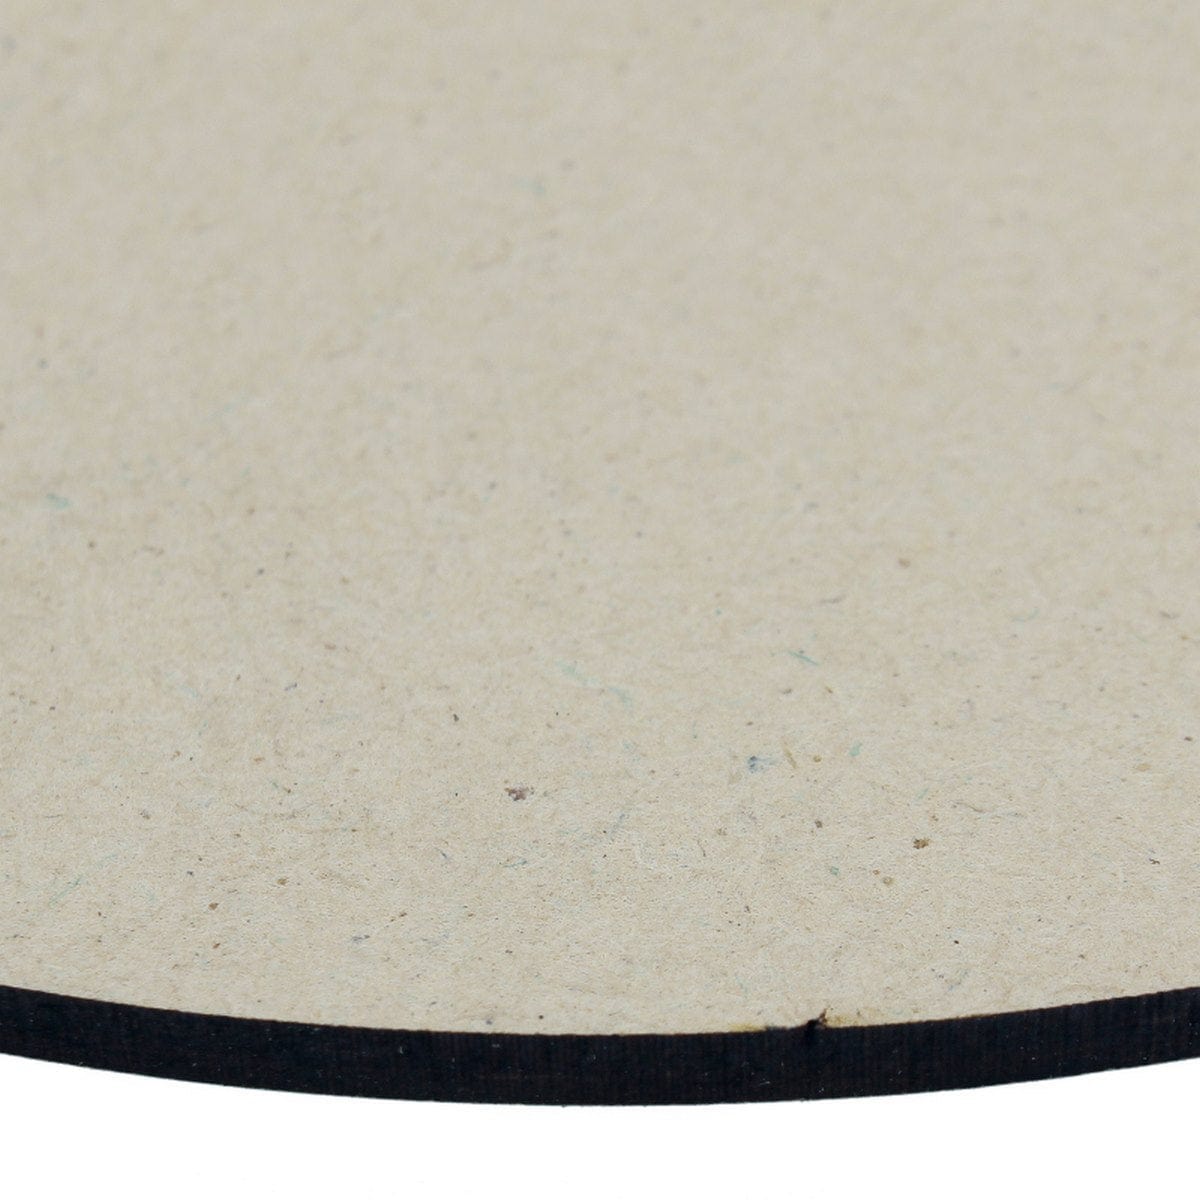 jags-mumbai MDF MDF Plate Round 7 Inch [4mm] (Contain 1 Unit) - Durable and Versatile